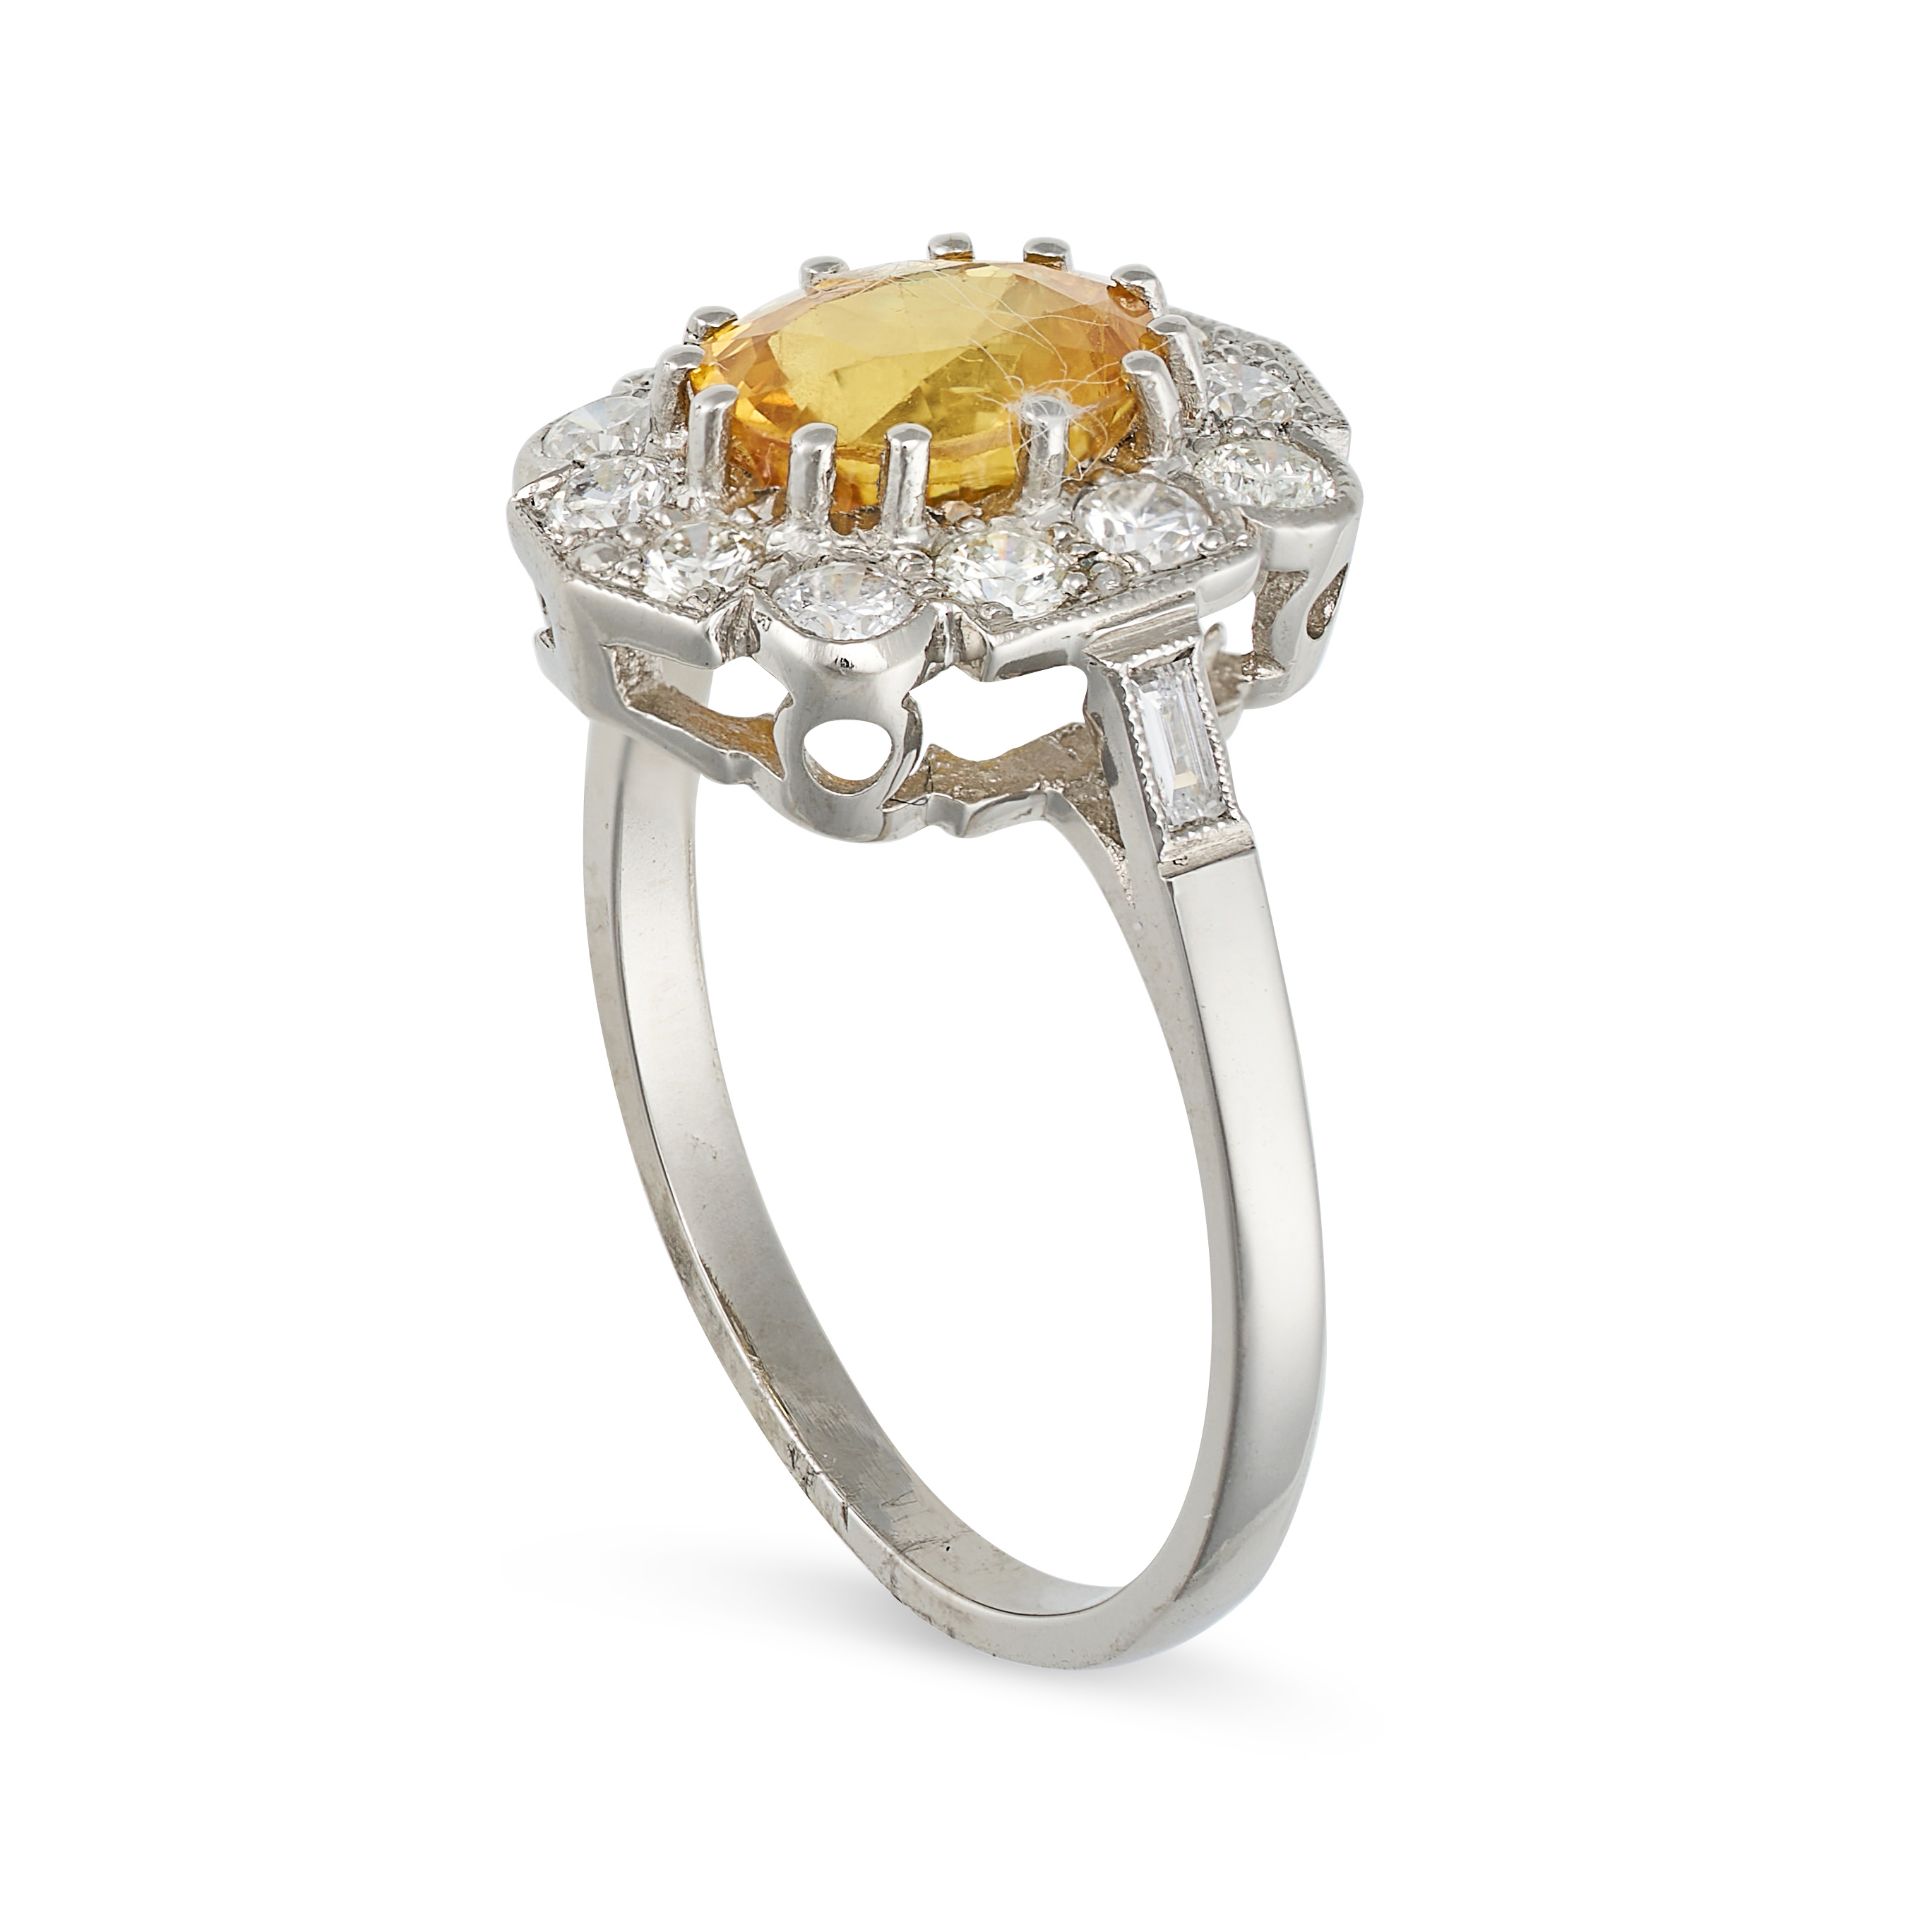 A YELLOW SAPPHIRE AND DIAMOND CLUSTER RING in platinum, set with an oval cut yellow sapphire of a... - Image 2 of 2